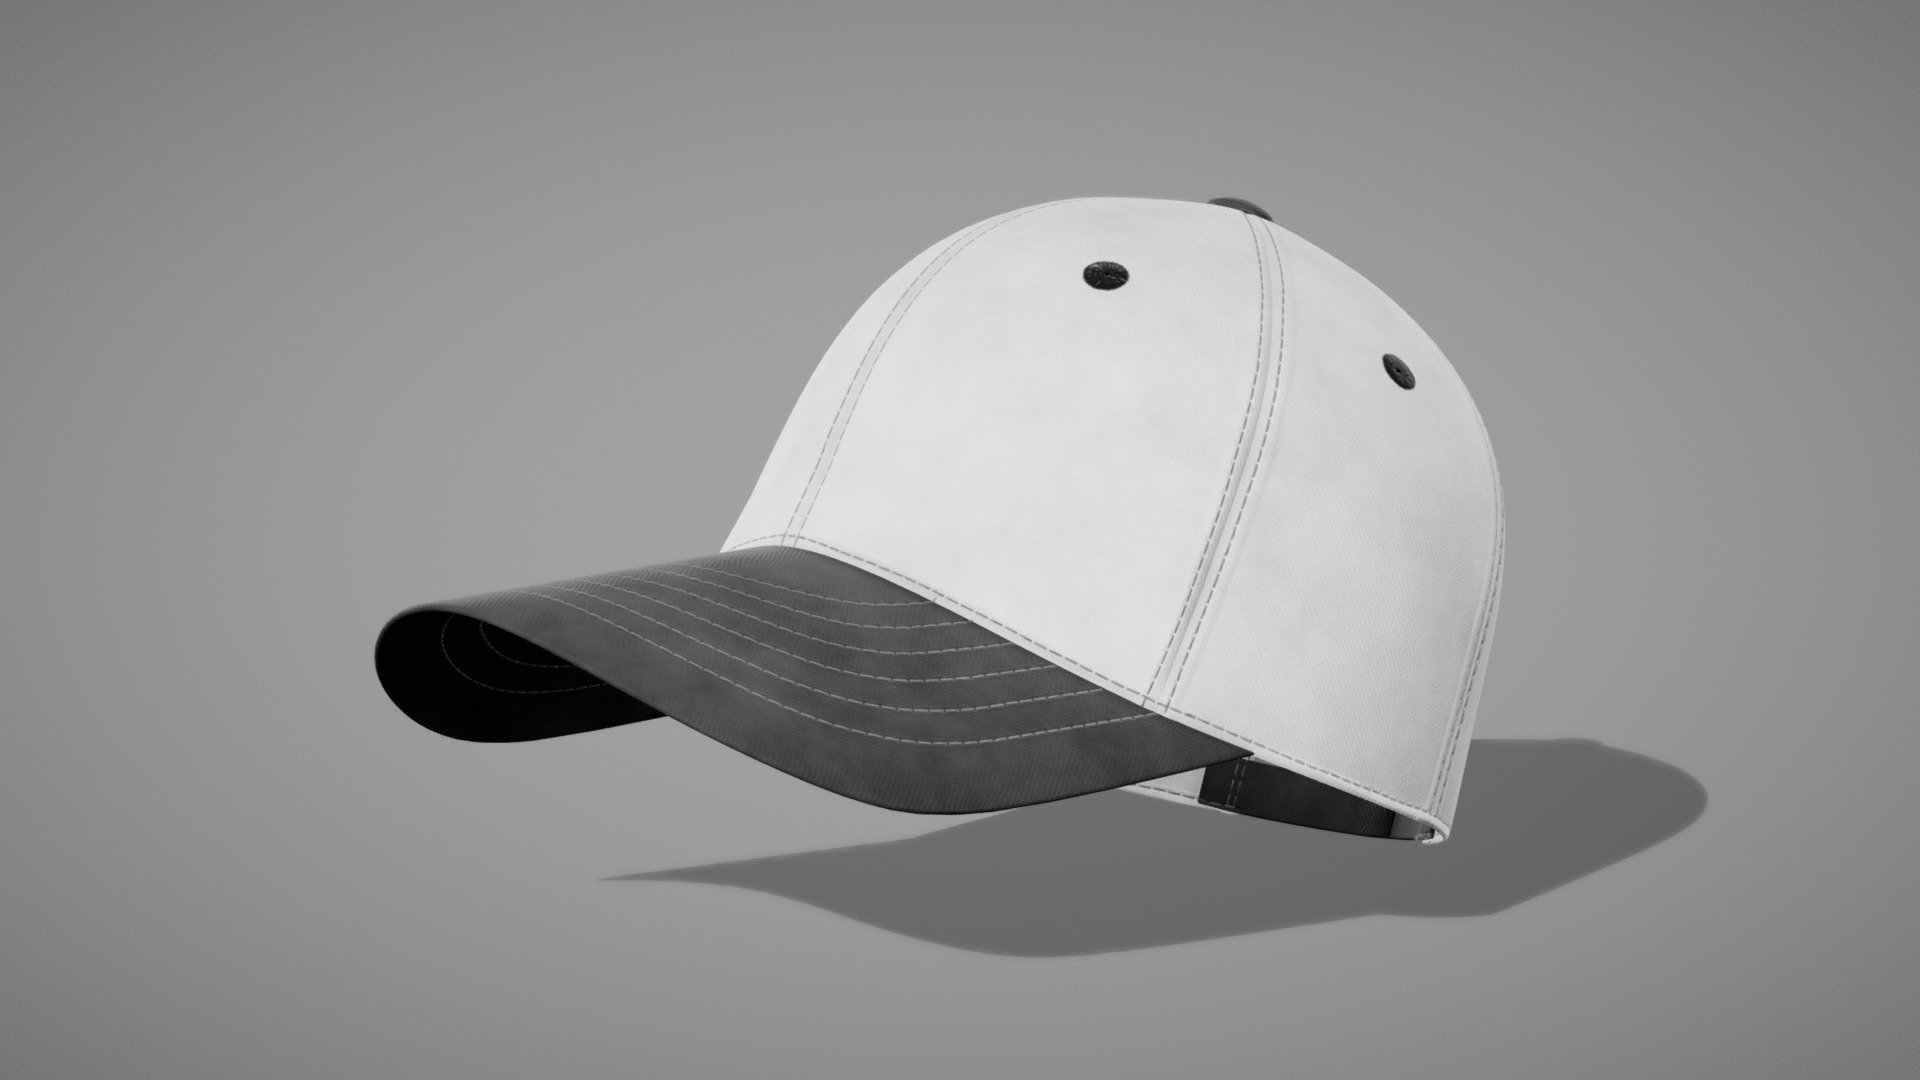 Its a Baseball Cap model,

Mesh - Low poly

Metarial - 1

Texture - 4k

Feel free to comment for review of this model or any suggestions 3d model